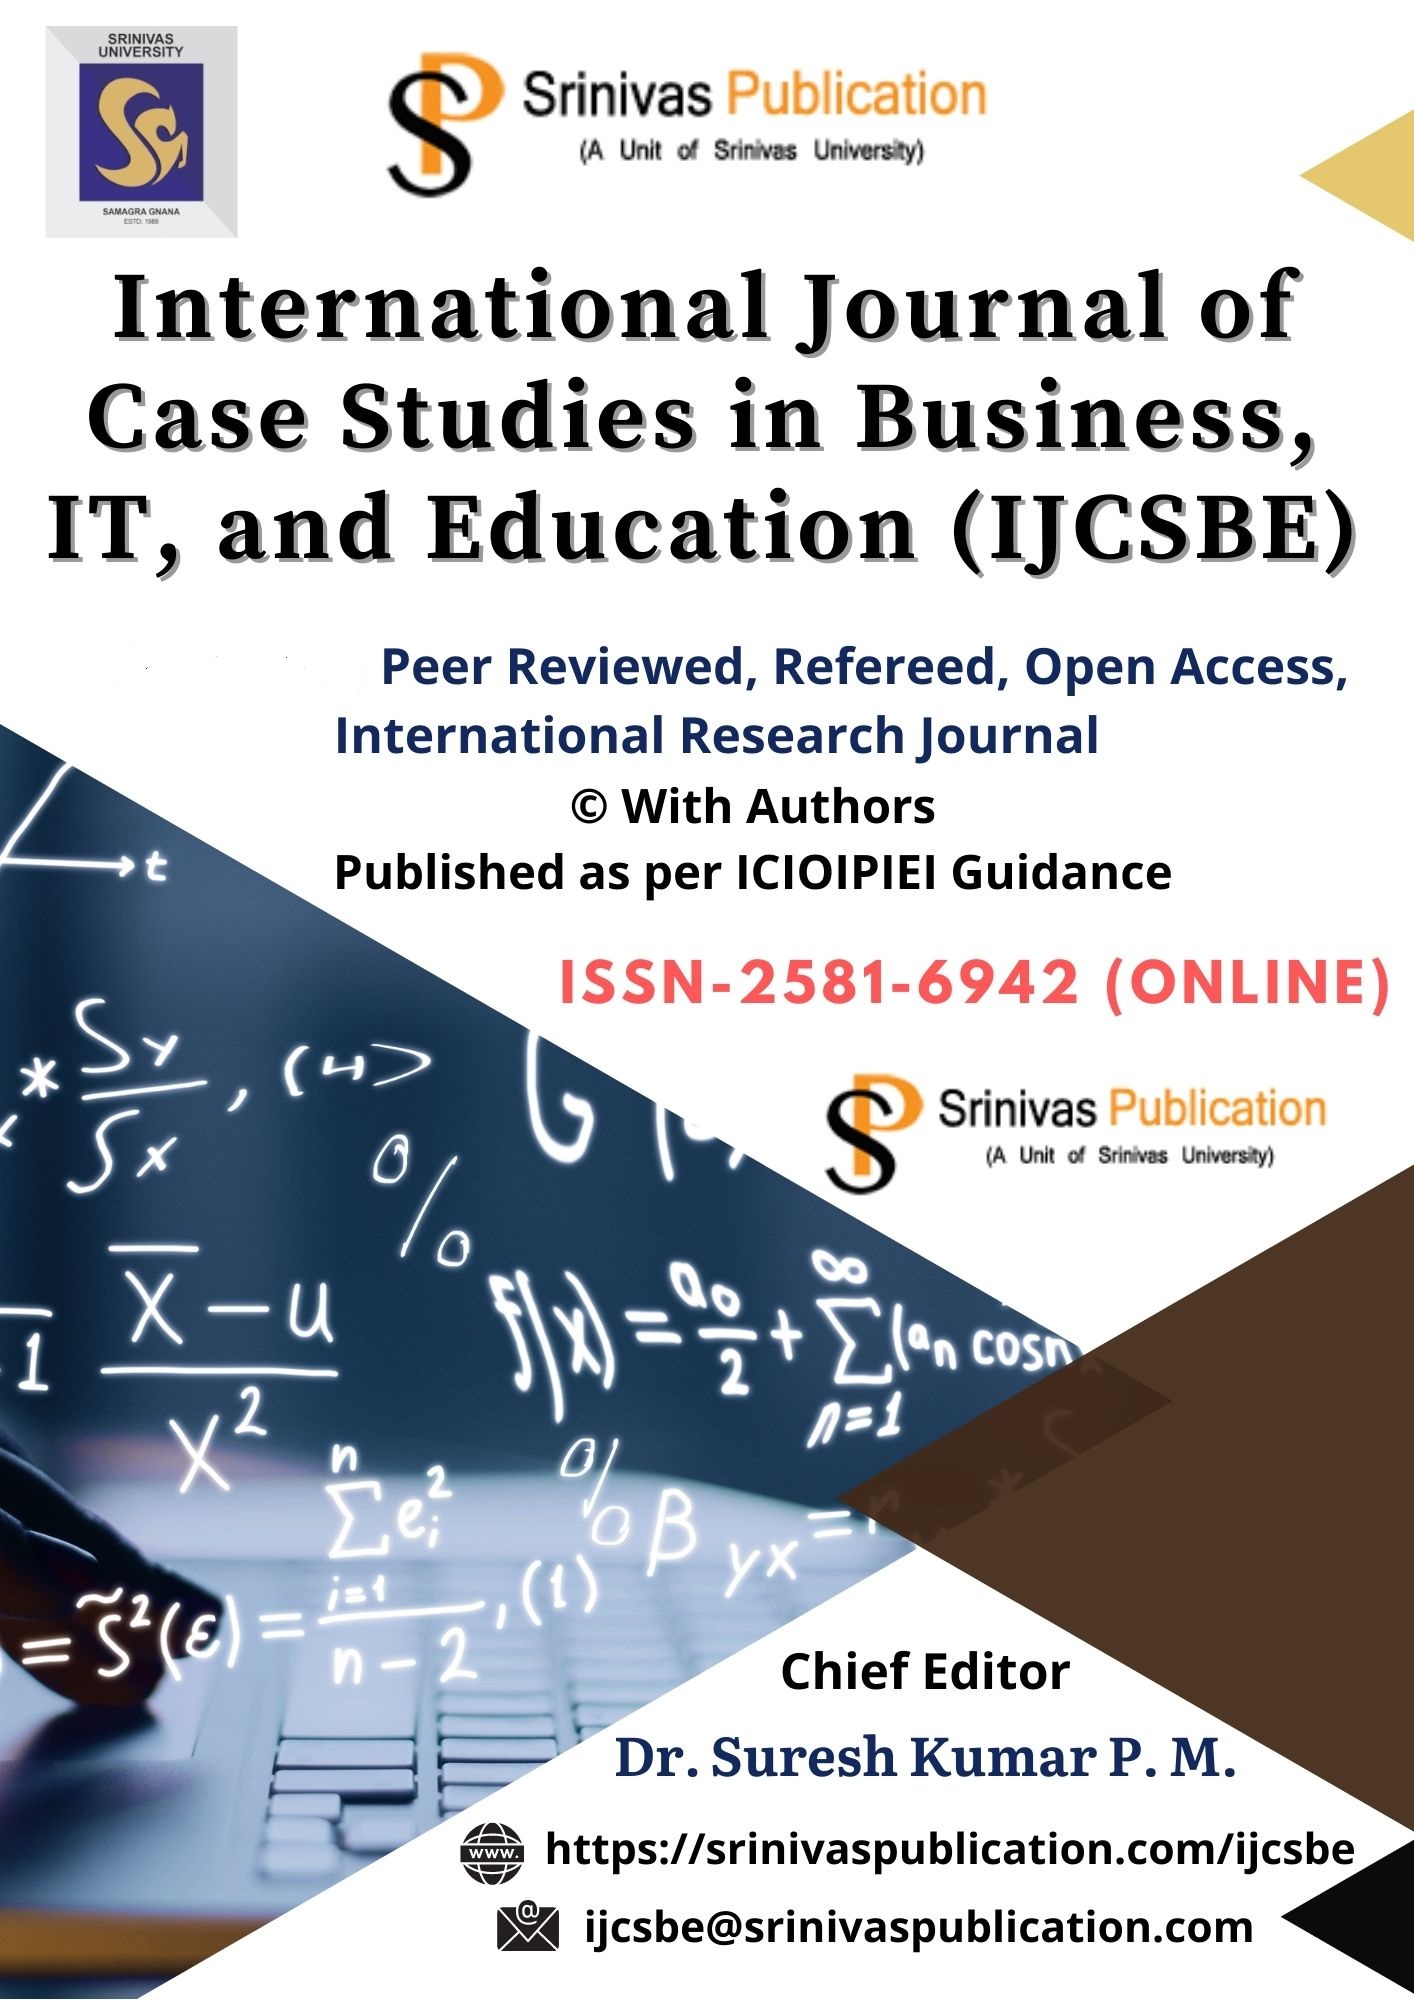 International Journal of Case Studies in Business, IT, and Education (IJCSBE) is an international, not-for-profit, open-access bi-annual online Refereed journal that accepts research works from scholars, academicians, professors, doctorates, lecturers and corporate in their respective expertise of studies. The aim of IJCSBE is to publish peer reviewed research and review articles. The mission of this journal is to publish original contributions in its field to promote research in various disciplines. IJCSBE aims to bring pure academic research and more practical publications in the area of Business, Information Technology, and Education especially Case studies.  So it covers the full range of research applied to various sciences that meet the future demands. All submitted articles should report original, previously unpublished (experimental or theoretical or Case studies) research and results. All the submissions in the scope of IJCSBE will be peer-reviewed. All submissions are also checked for plagiarism. The length of the manuscript must be between five (5) to twenty (20) journal pages excluding references.